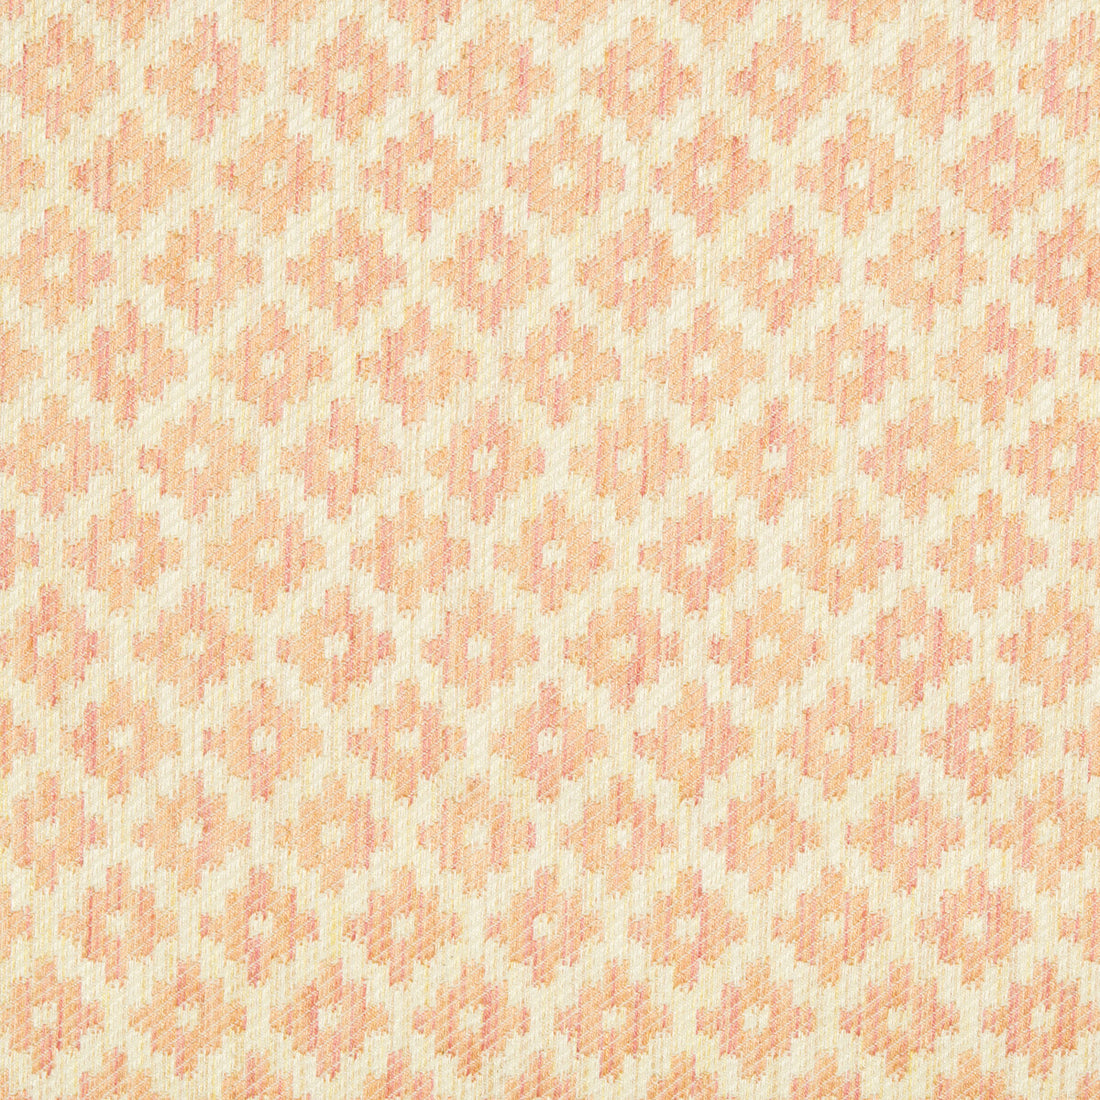 Baronet Strie fabric in blush color - pattern 8017142.17.0 - by Brunschwig &amp; Fils in the Baronet collection